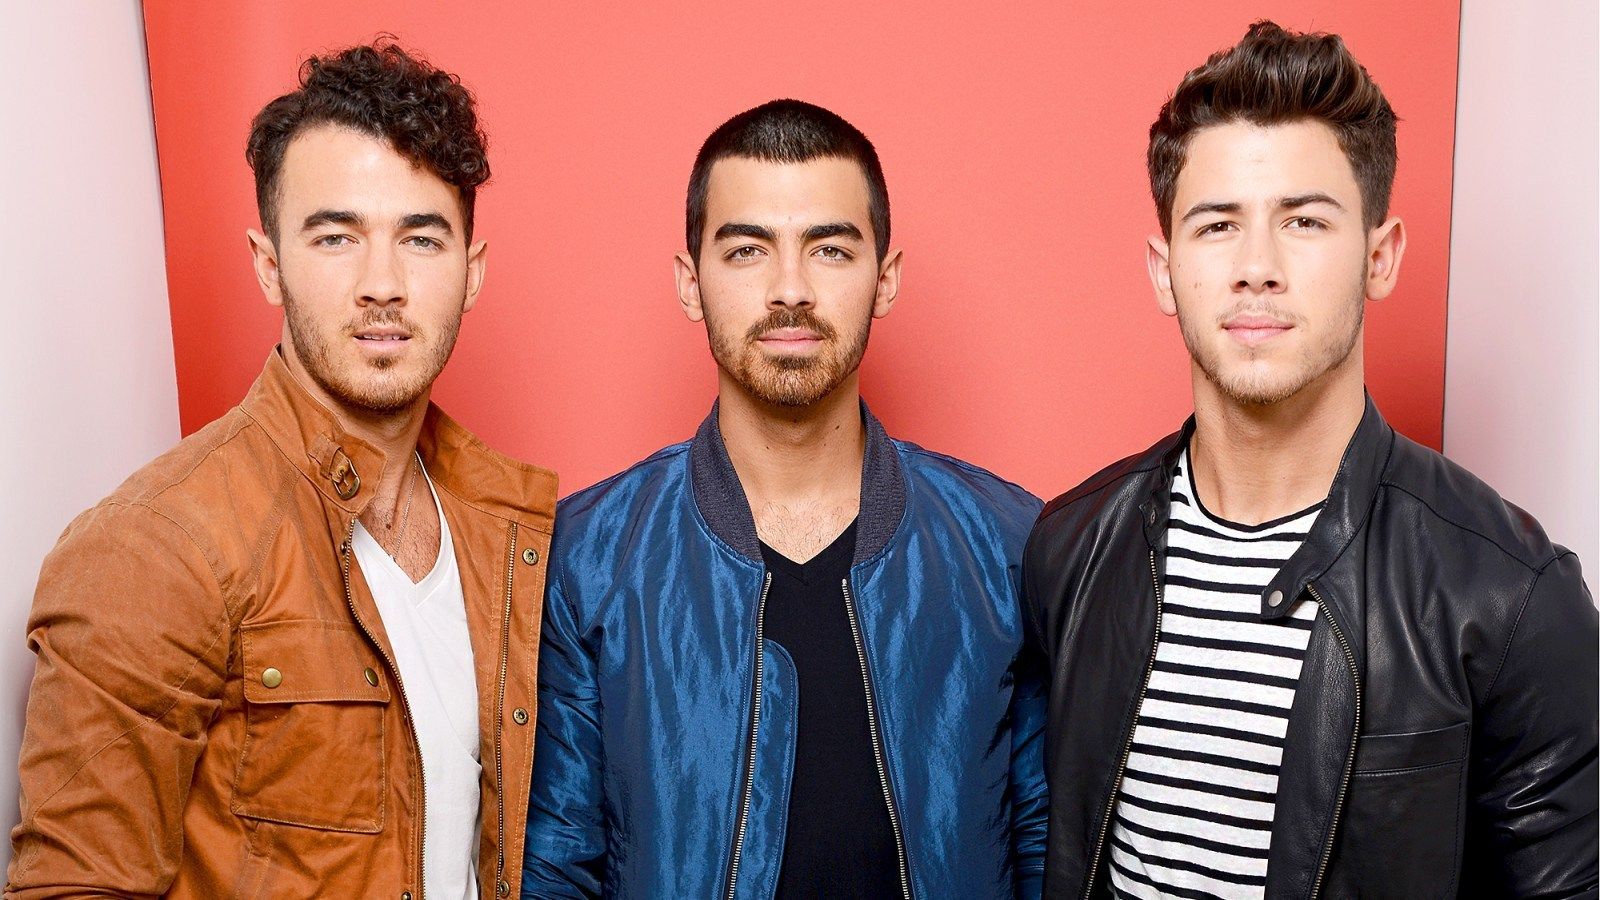 Will The Jonas Brothers Be Reuniting in 2018? Heres What We Know